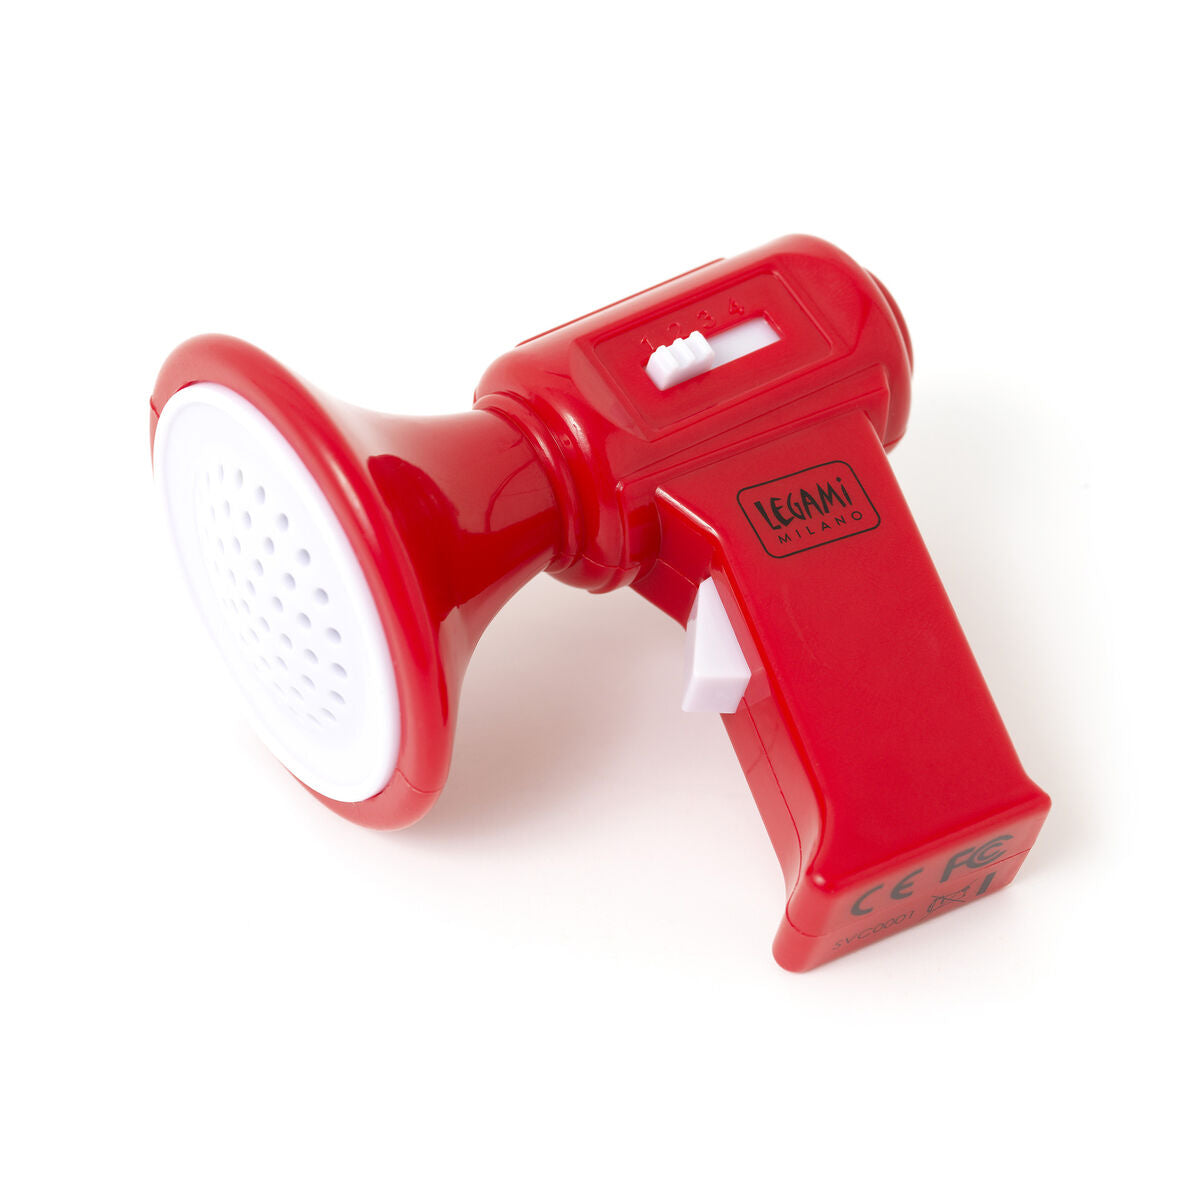 Gift | Legami Mini Voice Changer Megaphone by Weirs of Baggot St